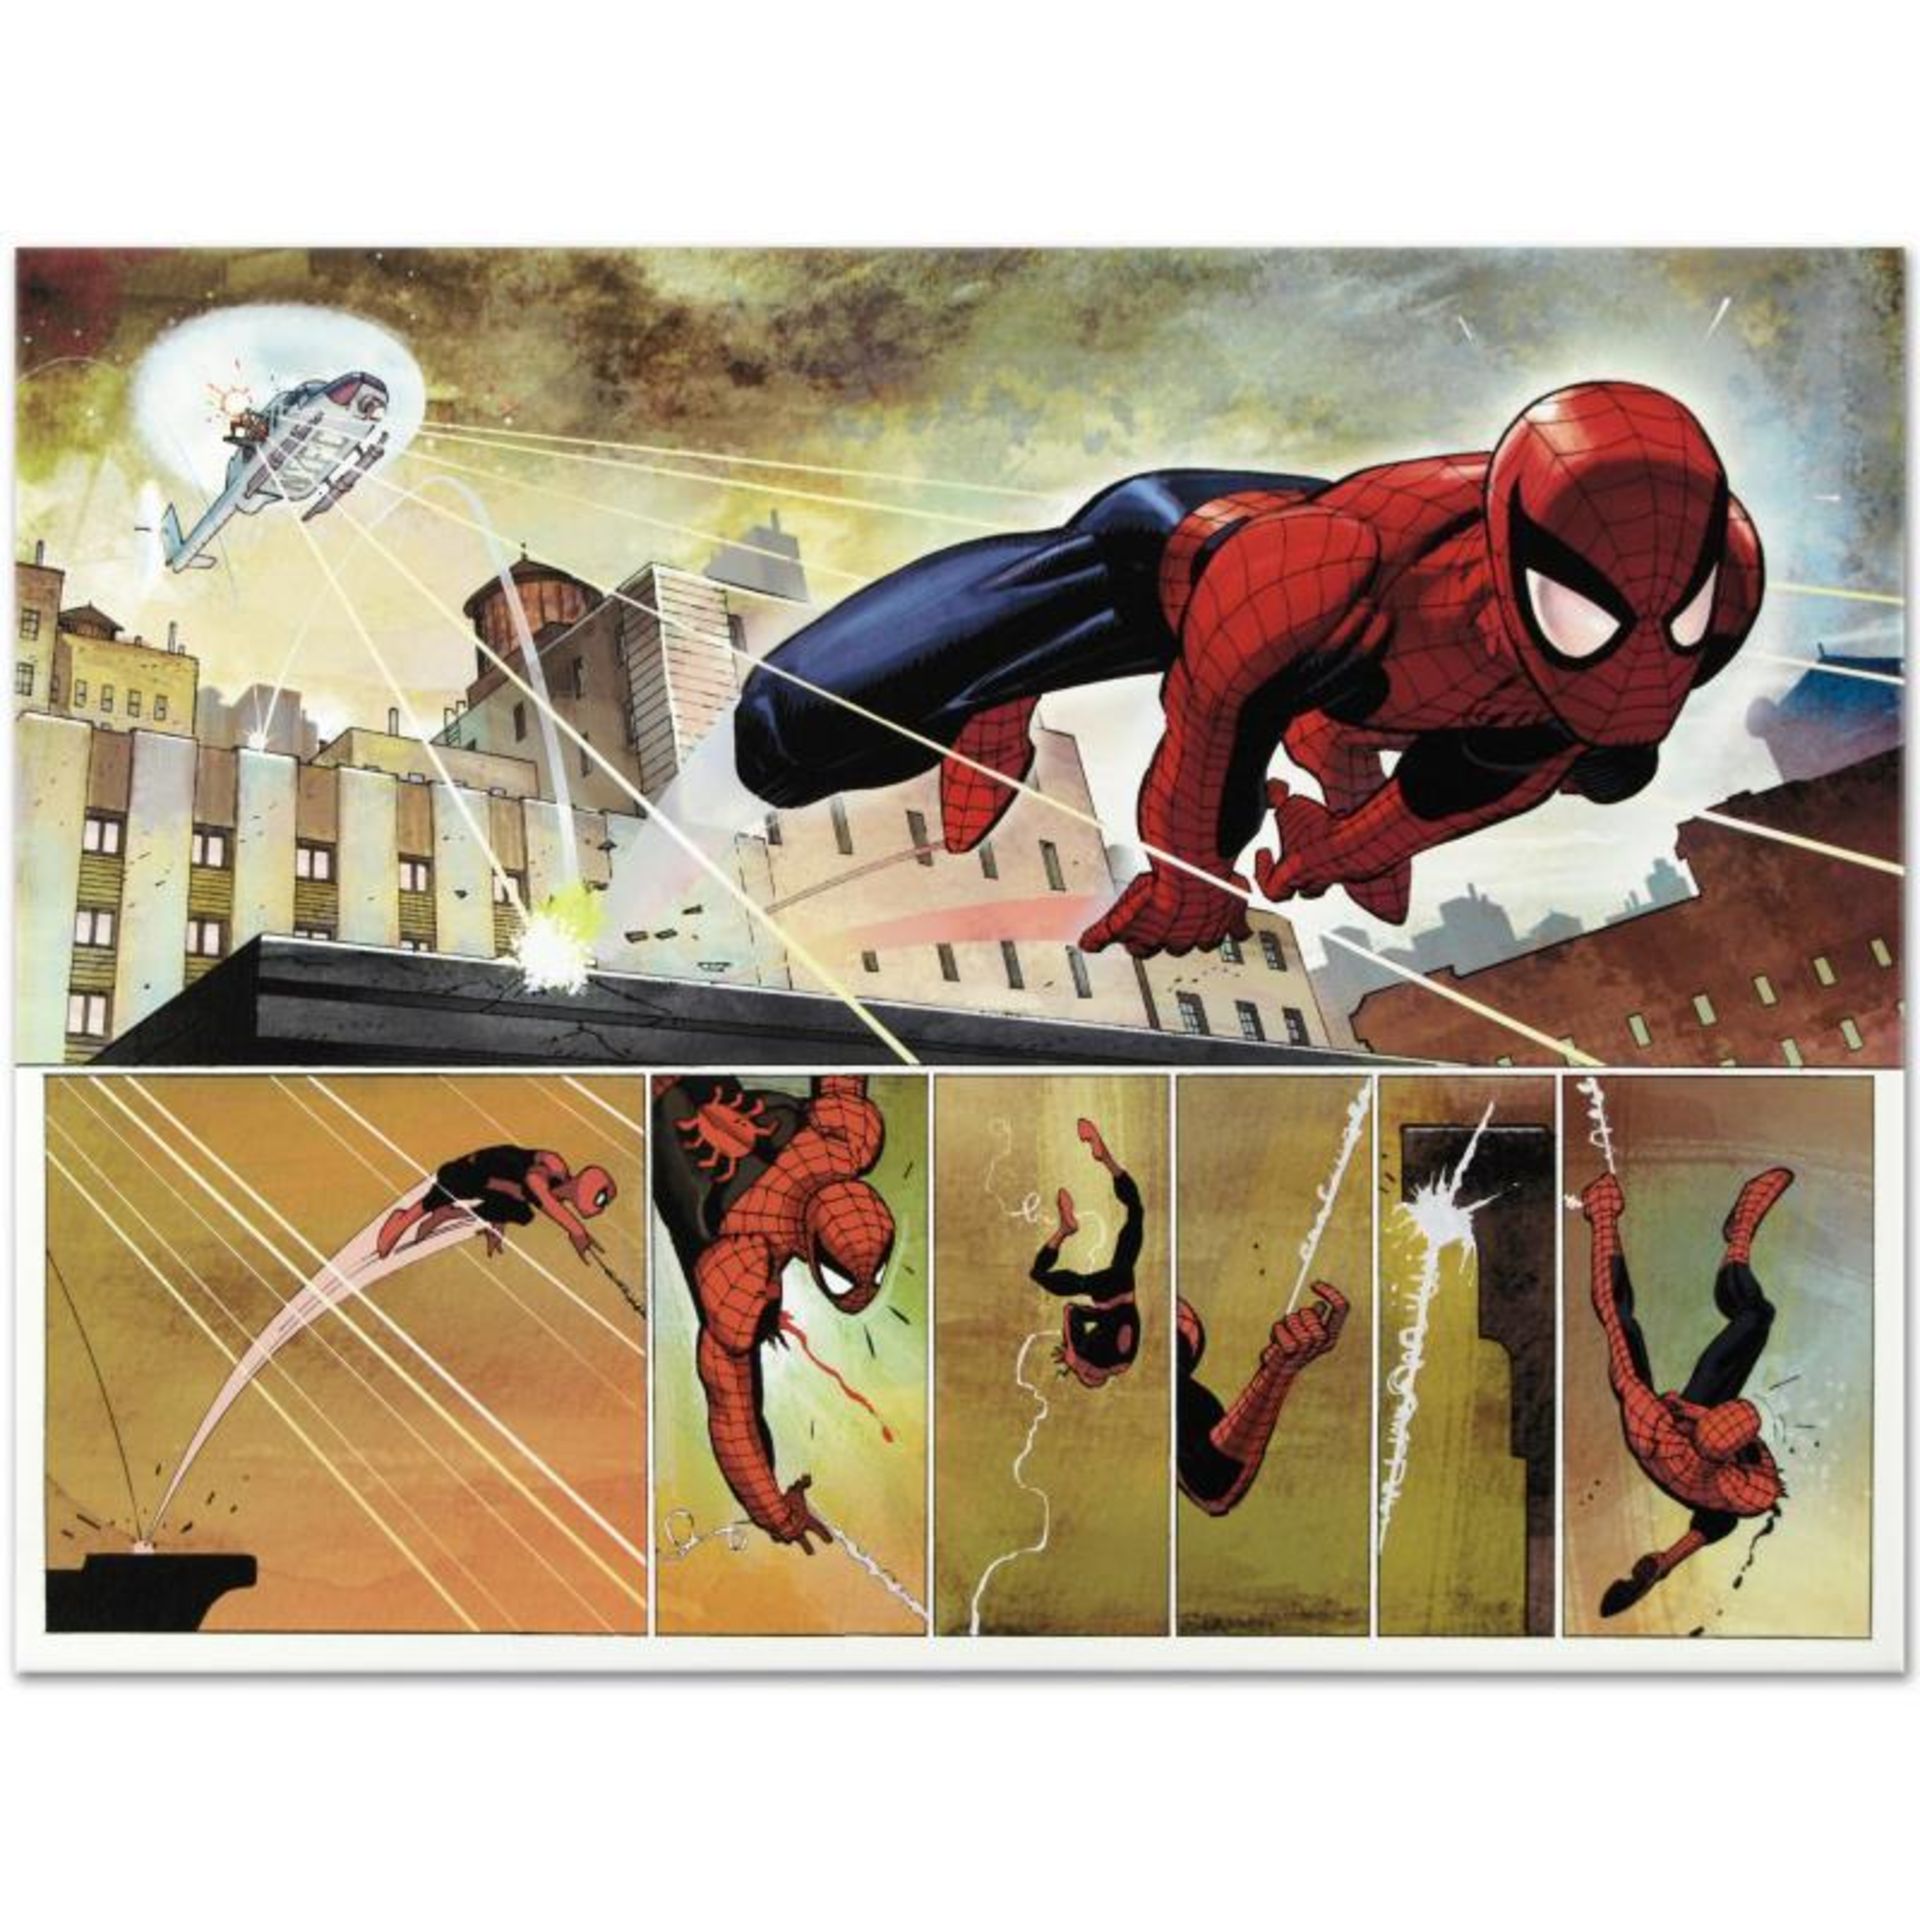 Marvel Comics "The Amazing Spider Man #584" Numbered Limited Edition Giclee on C